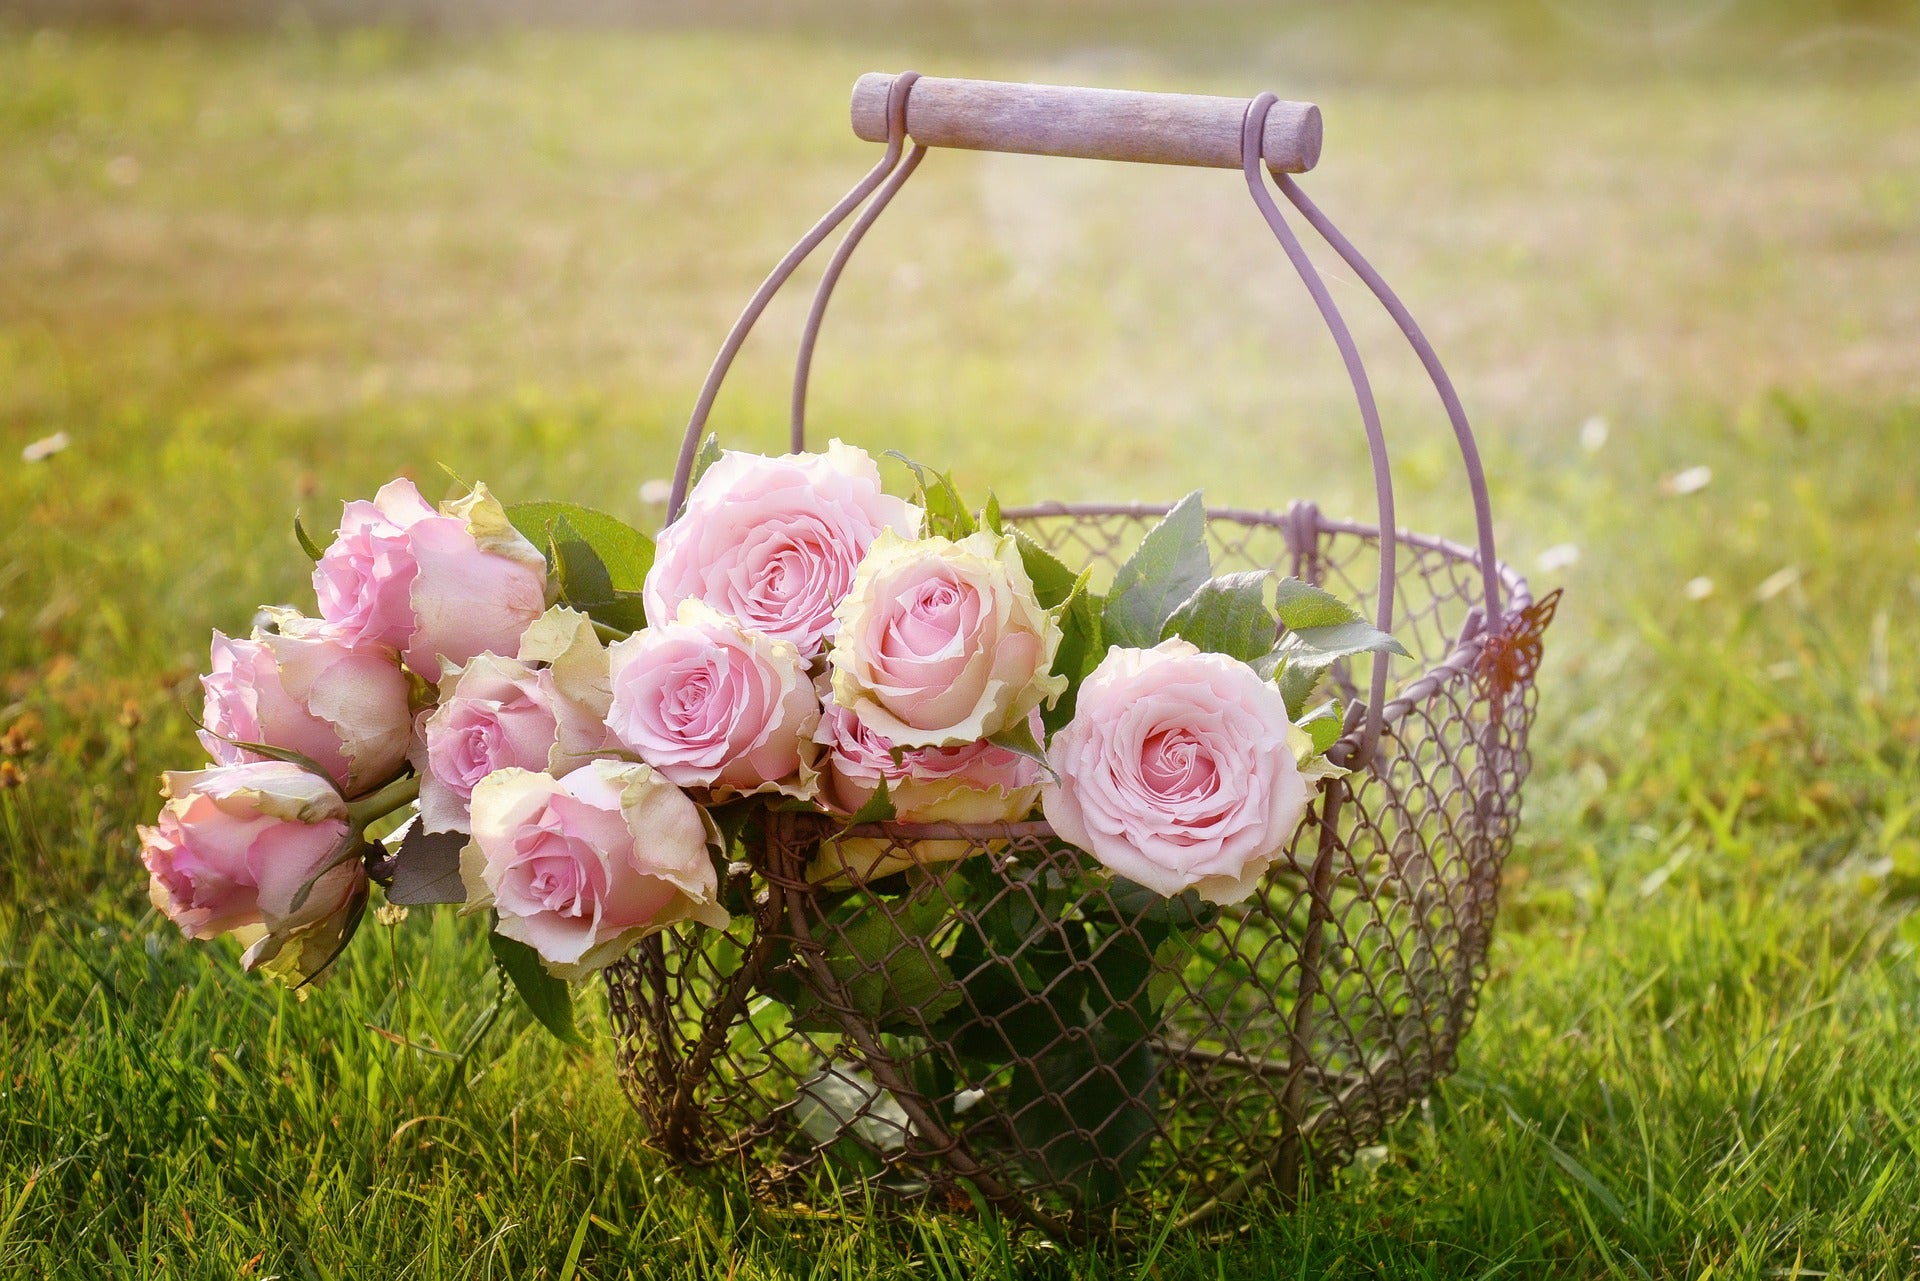 Pink edible roses in a basket sitting in a field